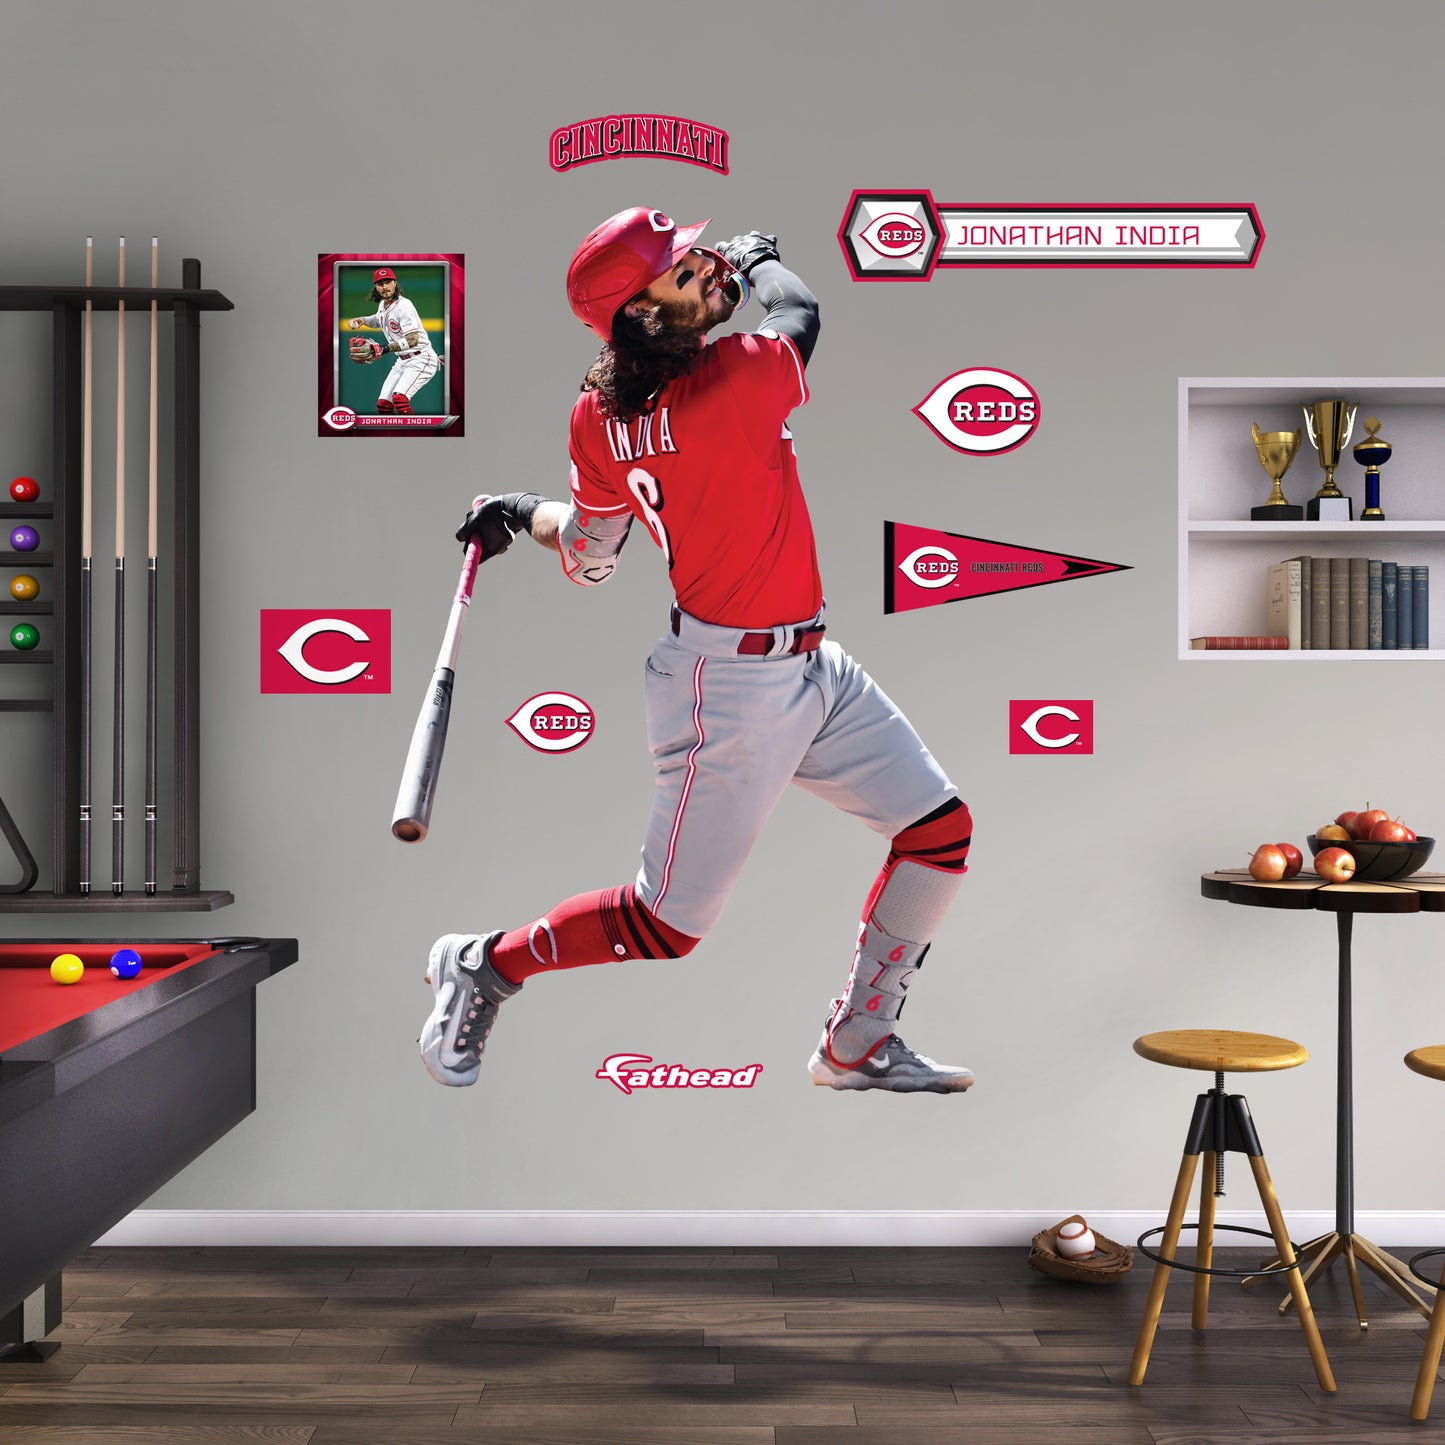 Cincinnati Reds: Jonathan India 2021 - Officially Licensed MLB Removable  Adhesive Decal